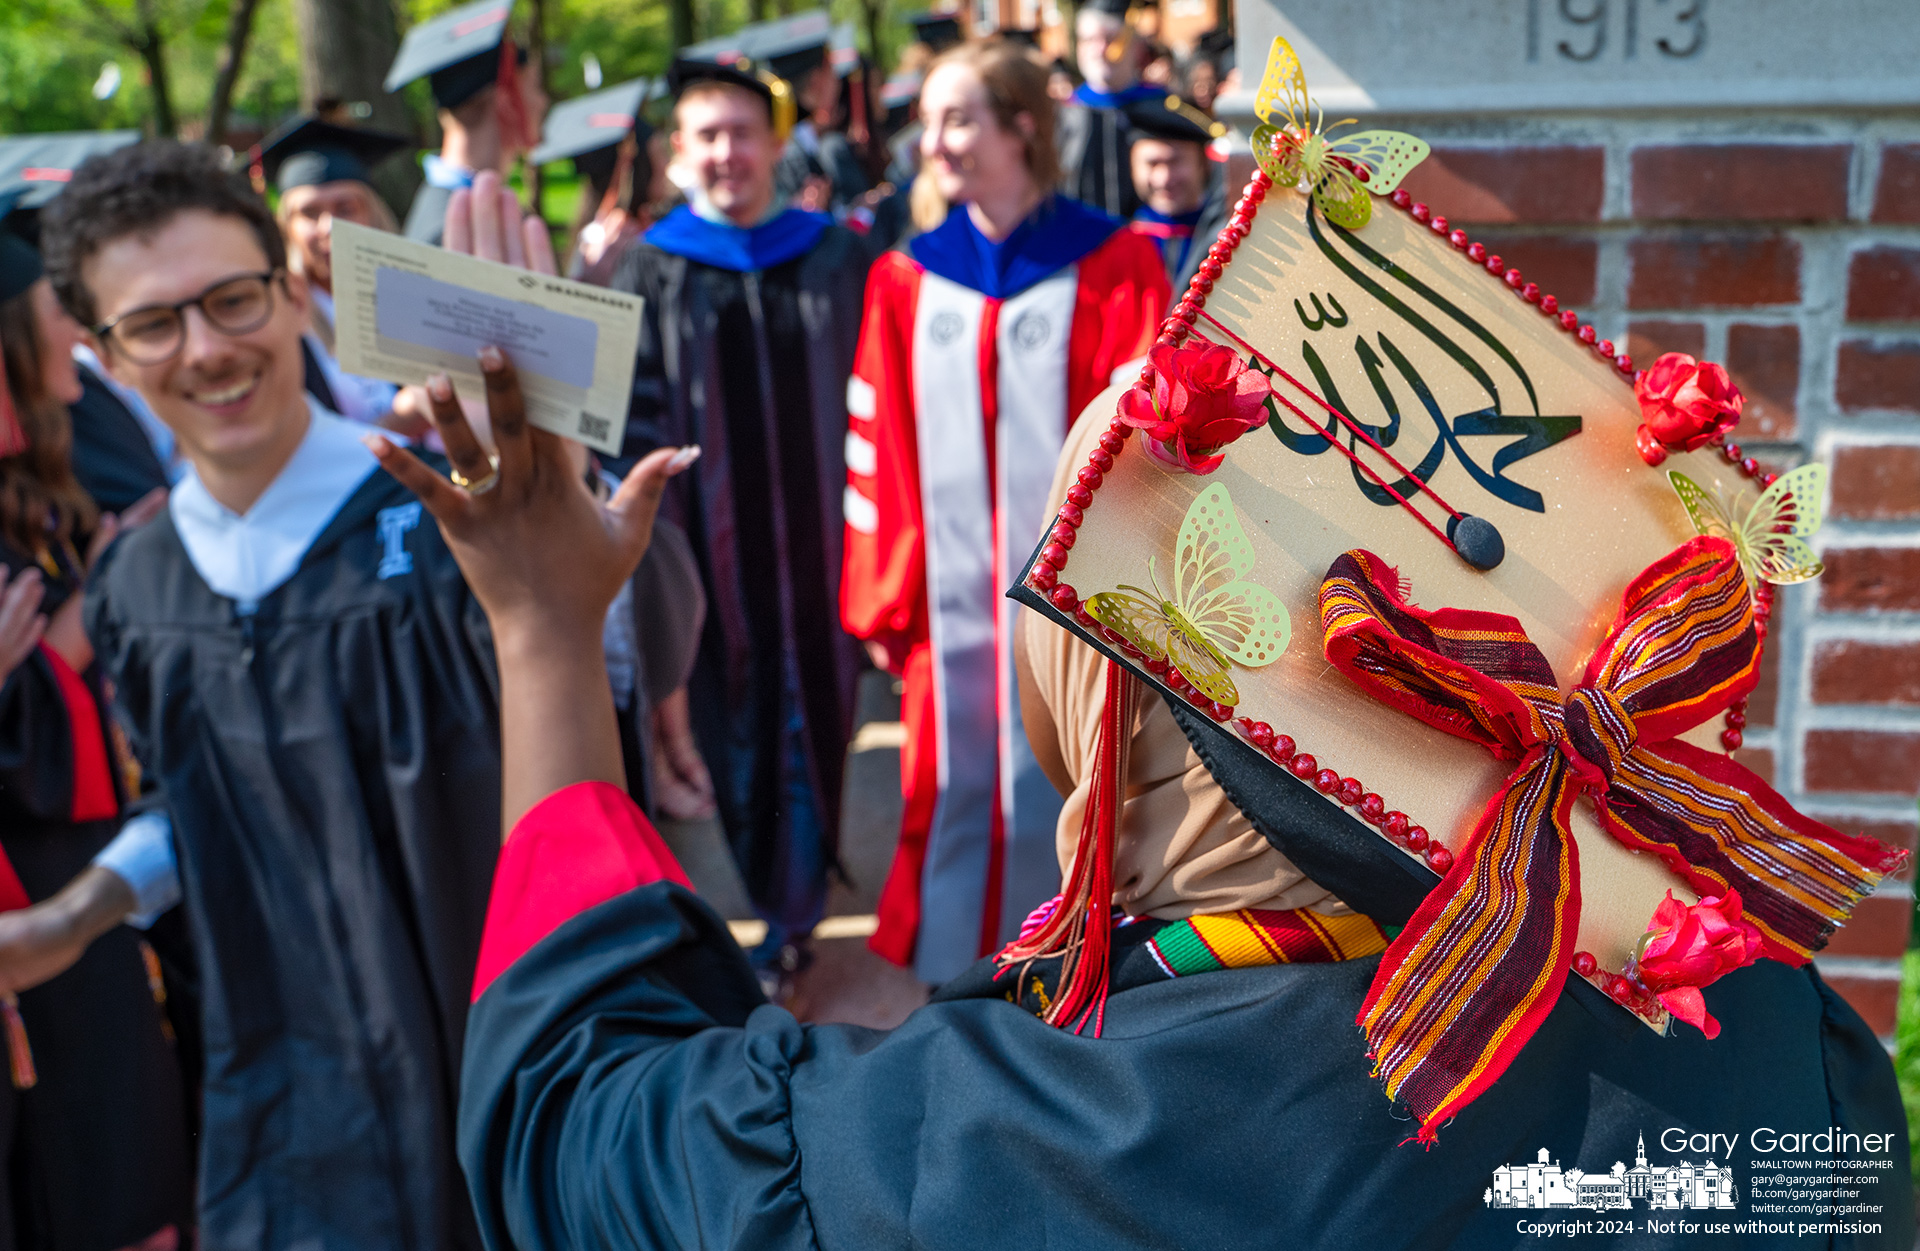 An Otterbein graduate wearing a mortar board emblazoned with "My Dream" in Arabic high-fives another graduate as they begin the procession for commencement ceremonies Sunday morning. My Final Photo for April 28, 2024.